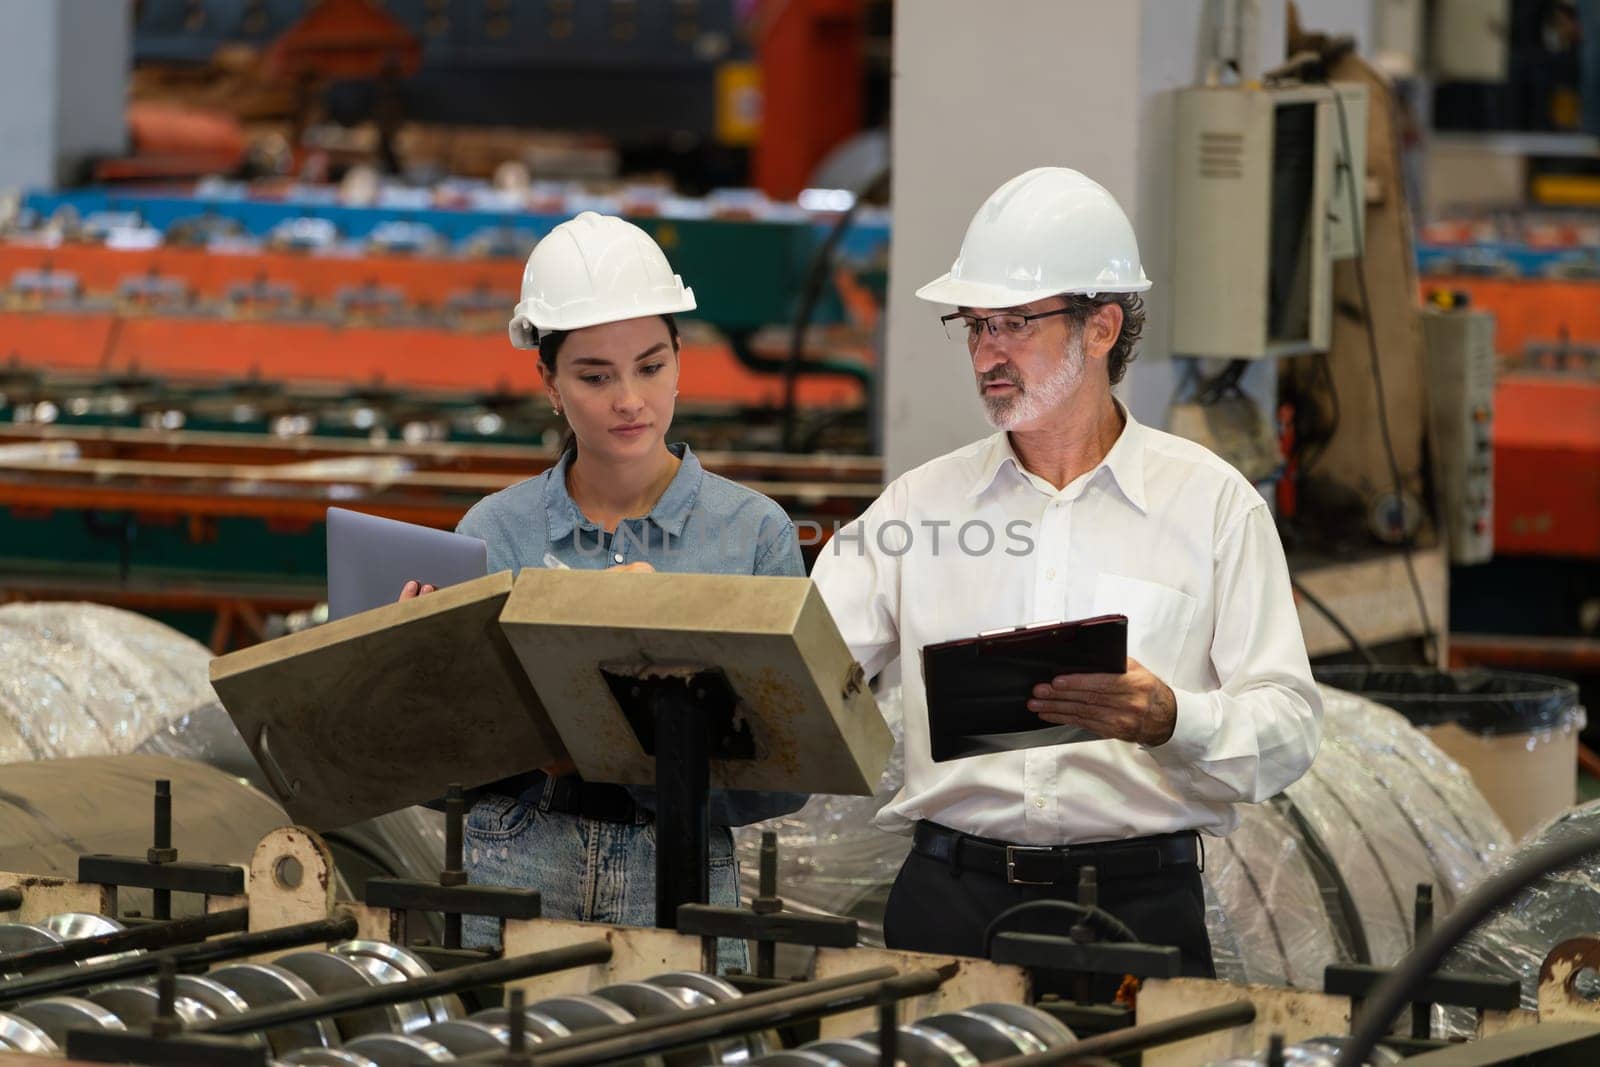 Factory engineer with assistant using laptop inspect factory. Exemplifying by biancoblue